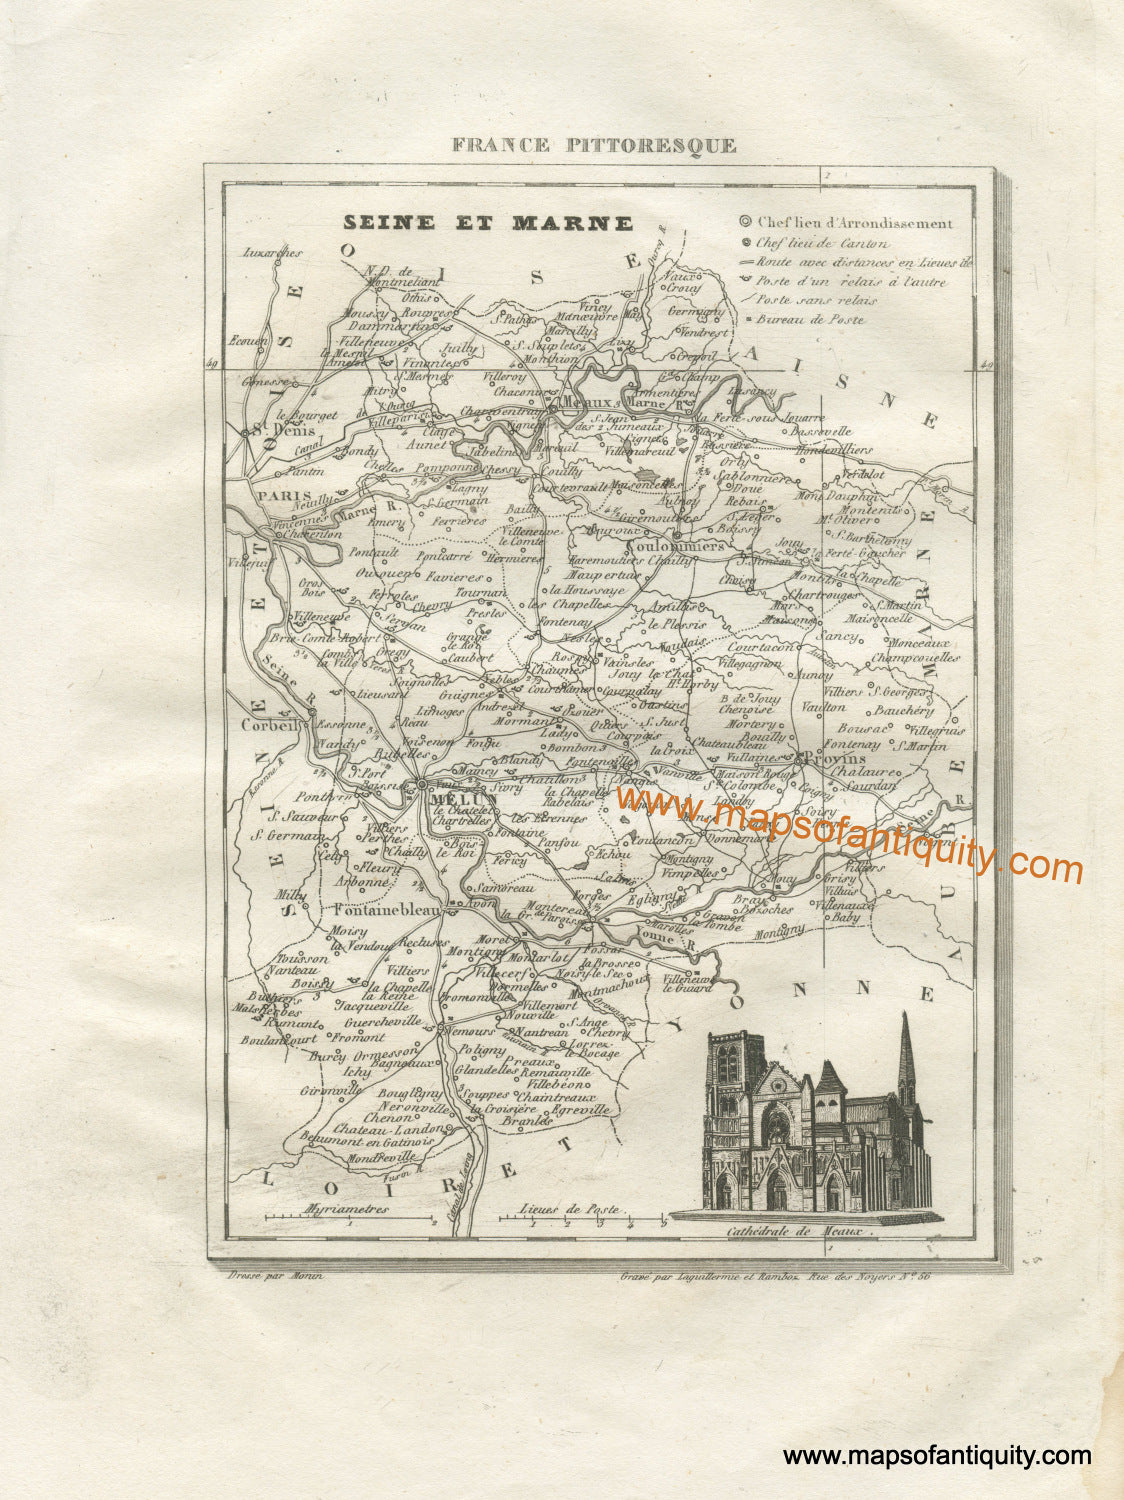 Antique-Black-and-White-Map-France-Seine-et-Marne-including-the-cities-of-St-Denis-Melun-Meaux-and-Provins-Europe-France-1835-Monin-Maps-Of-Antiquity